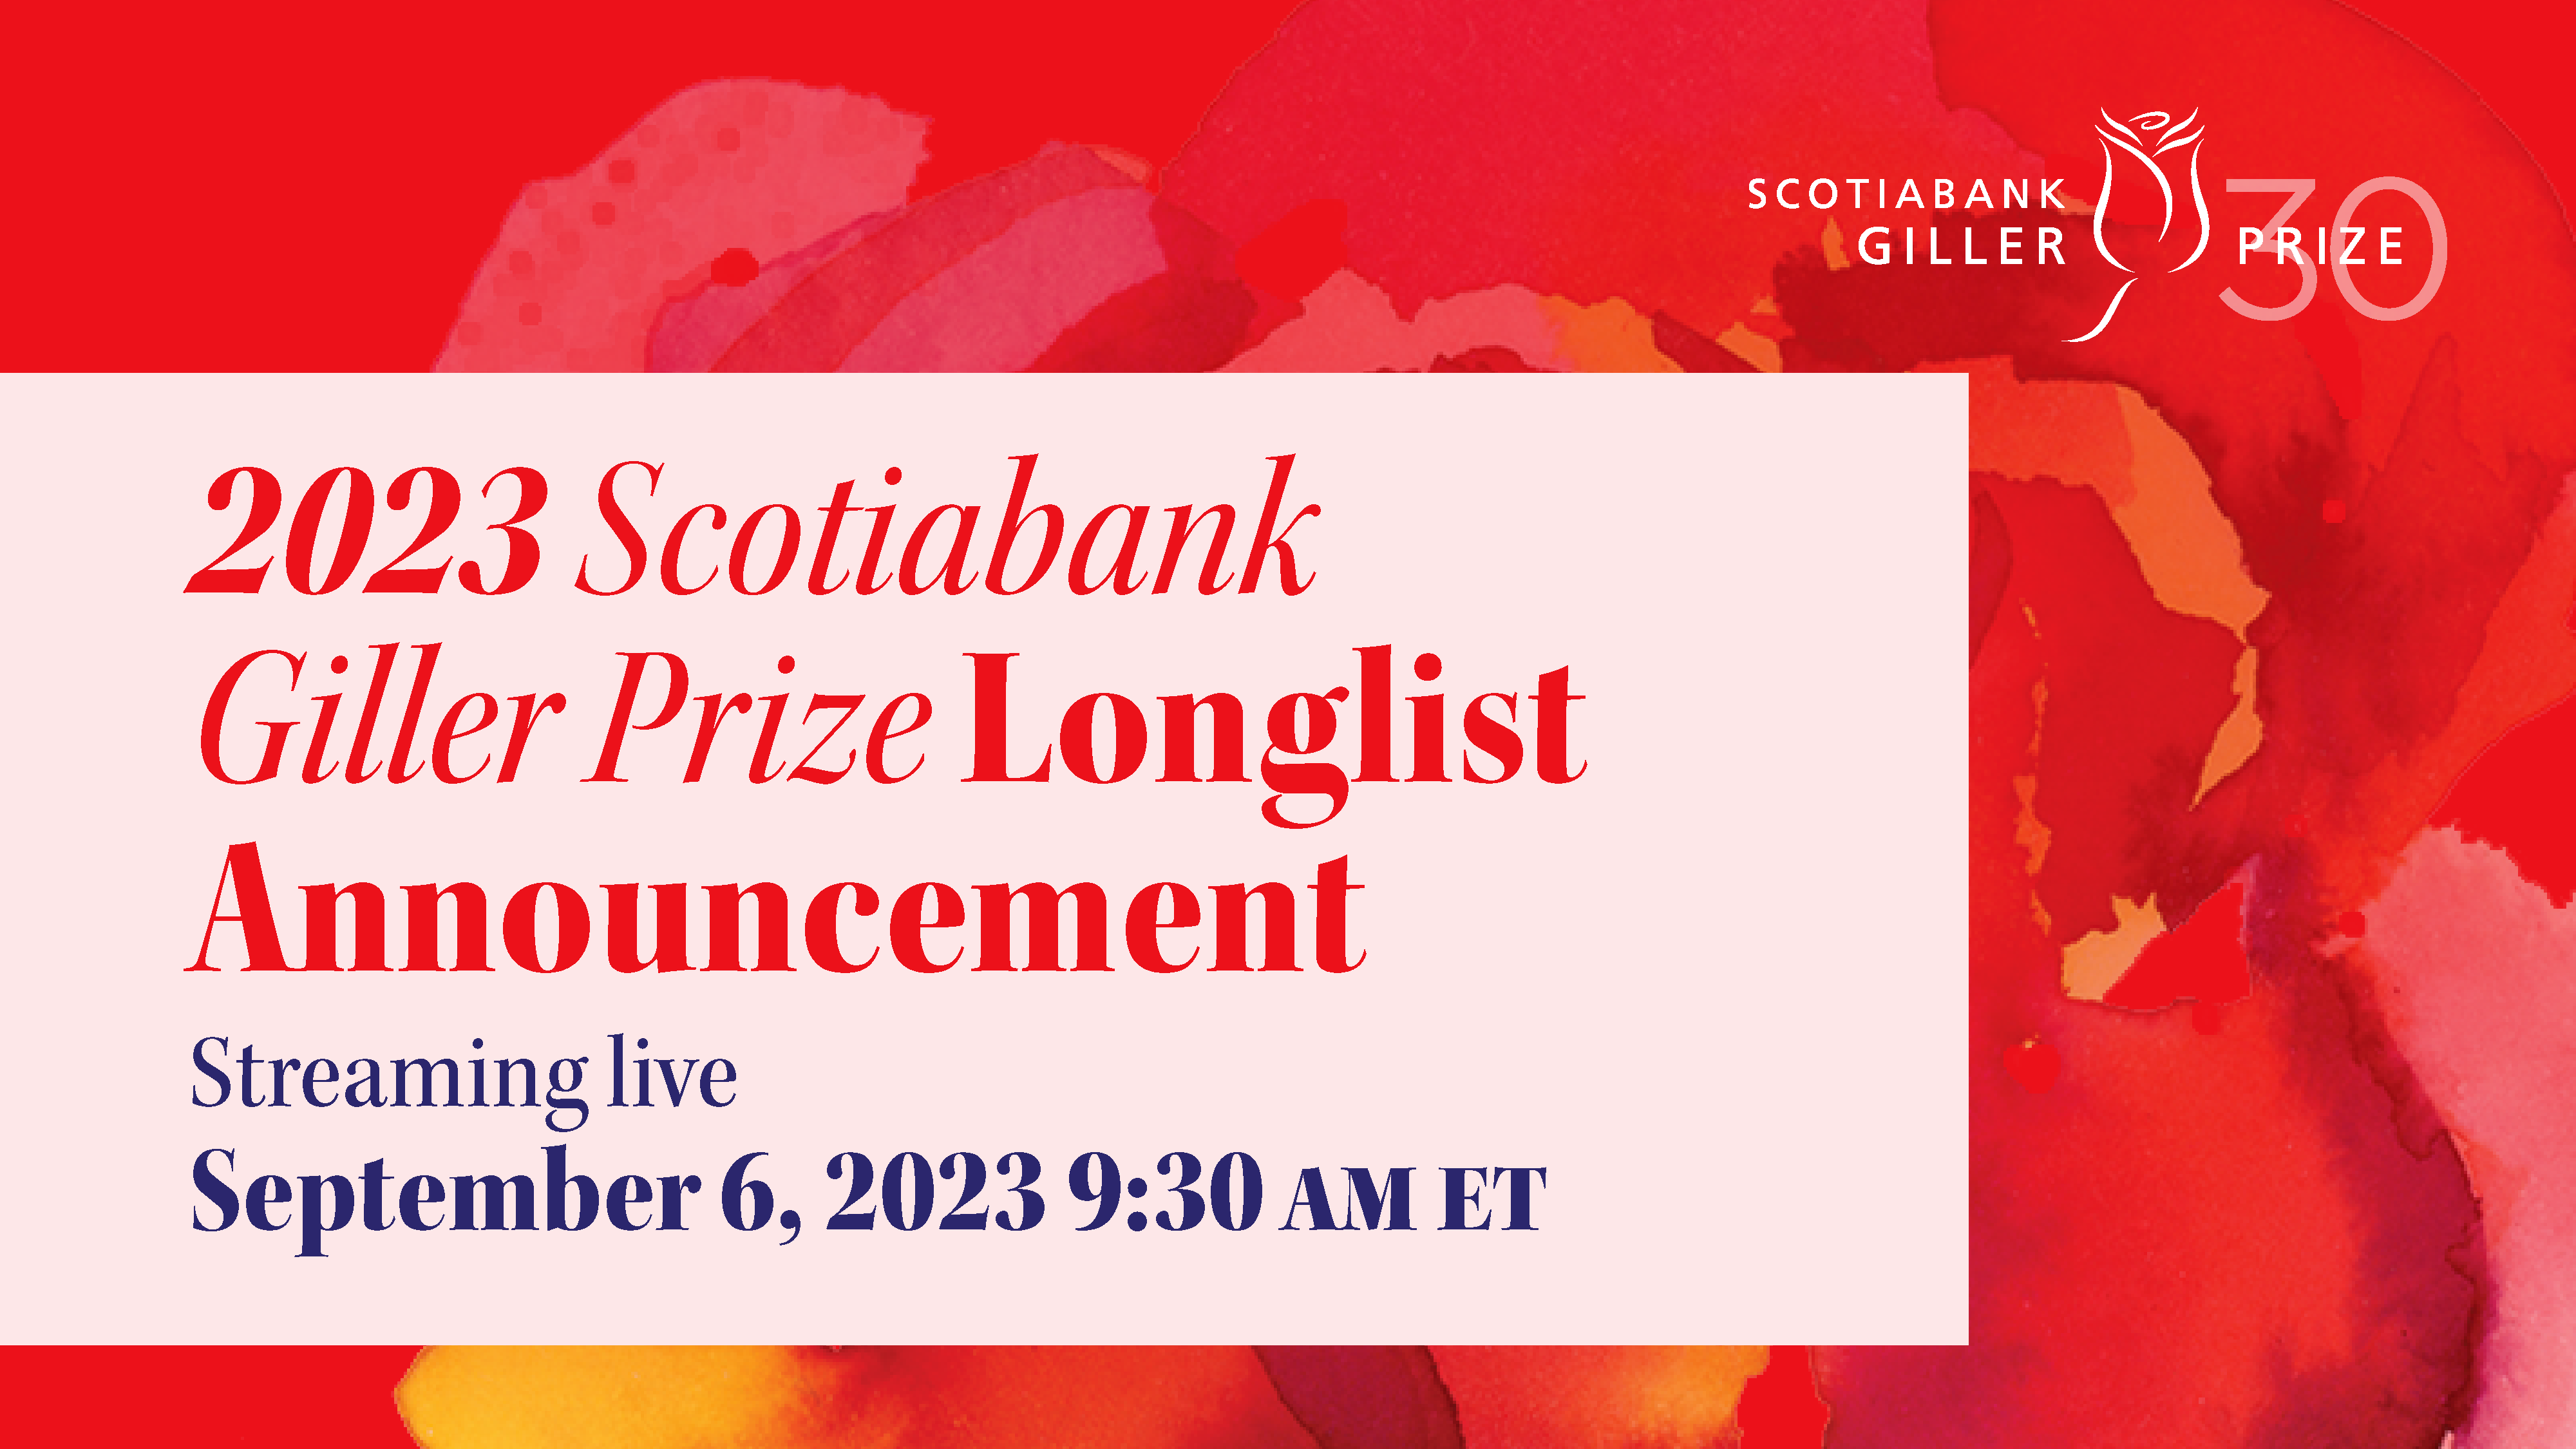 How to watch the 2023 Scotiabank Giller Prize longlist announcement